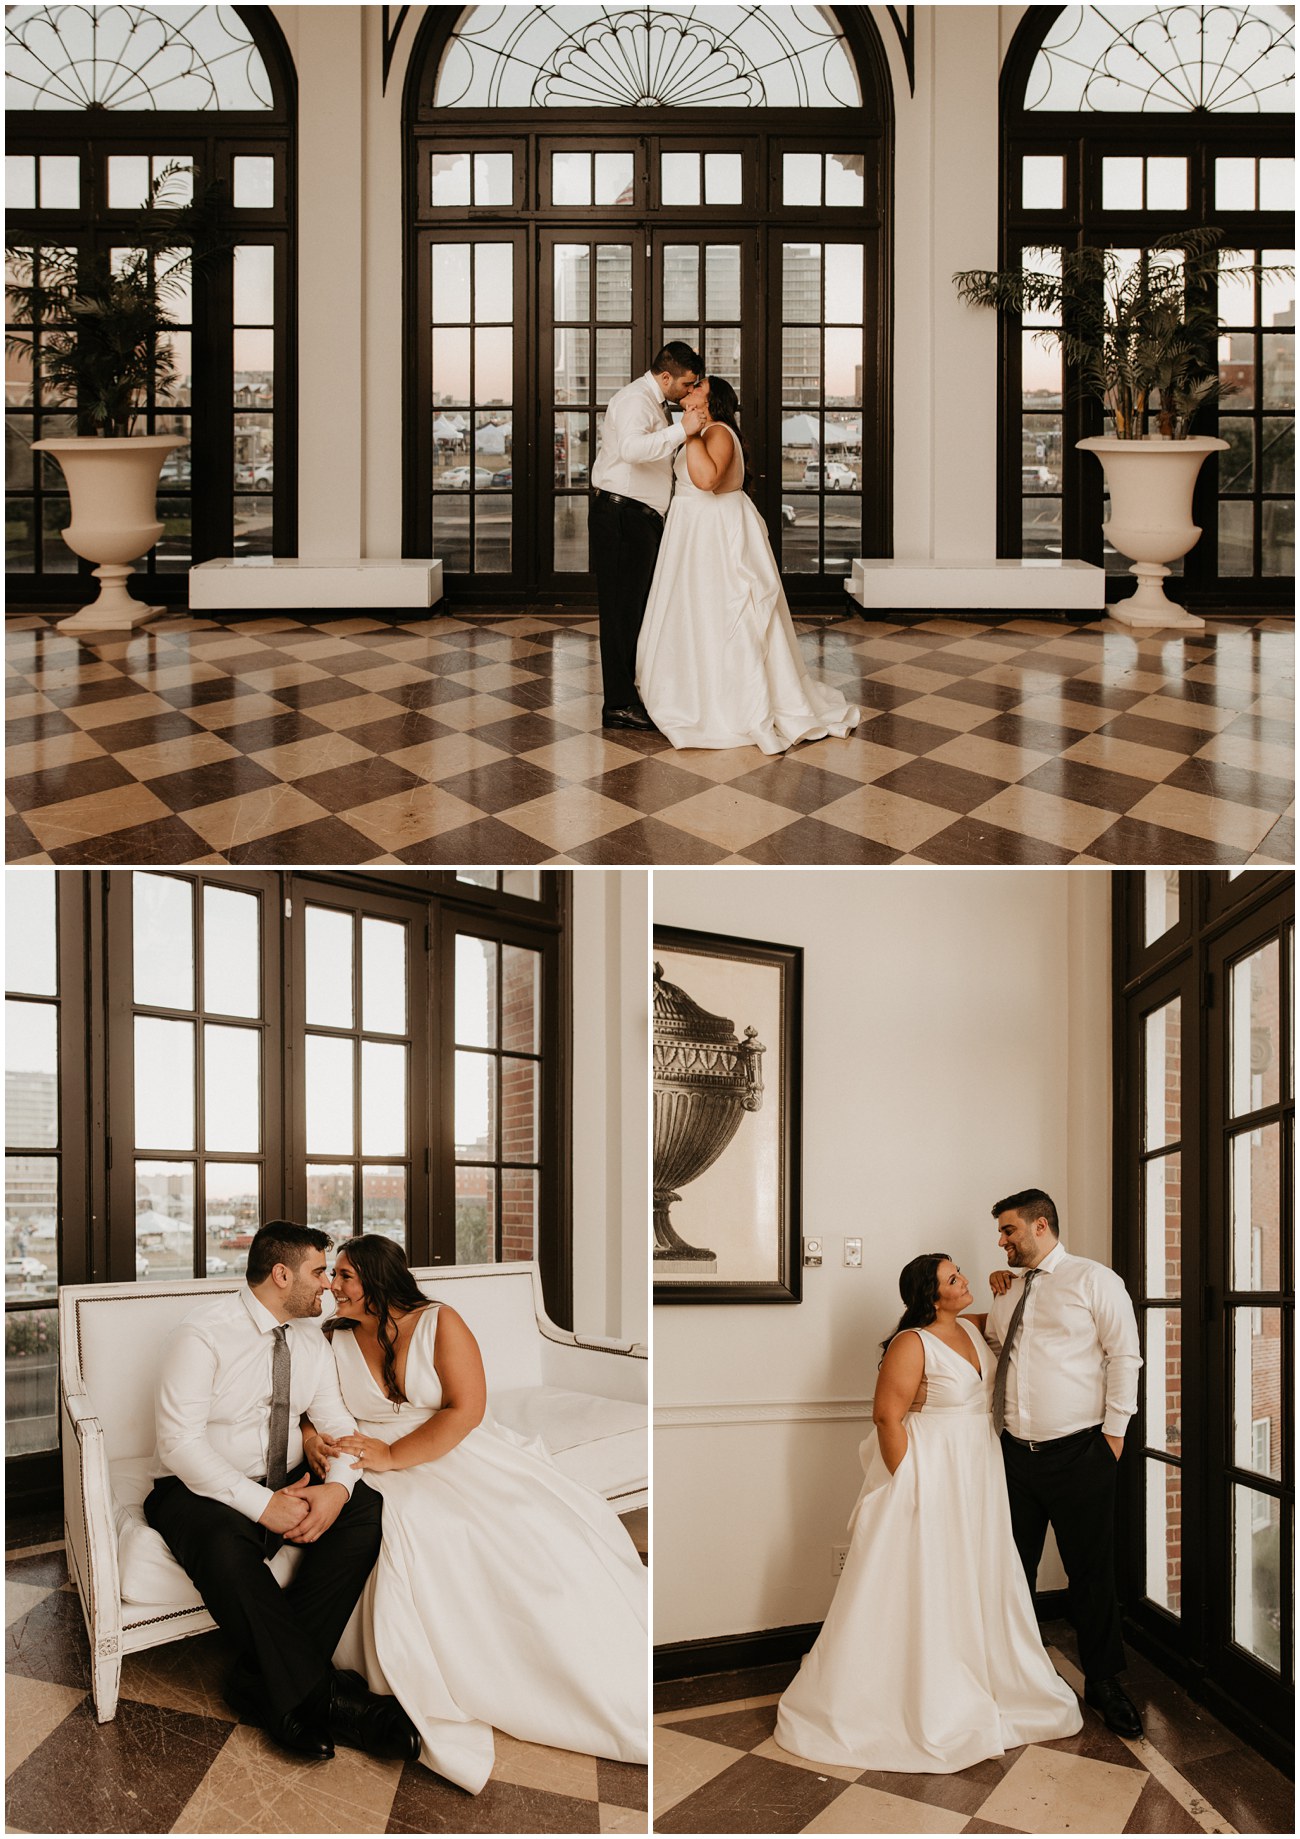 Collage of Bride and Groom portraits inside The Berkeley Hotel in Asbury Park